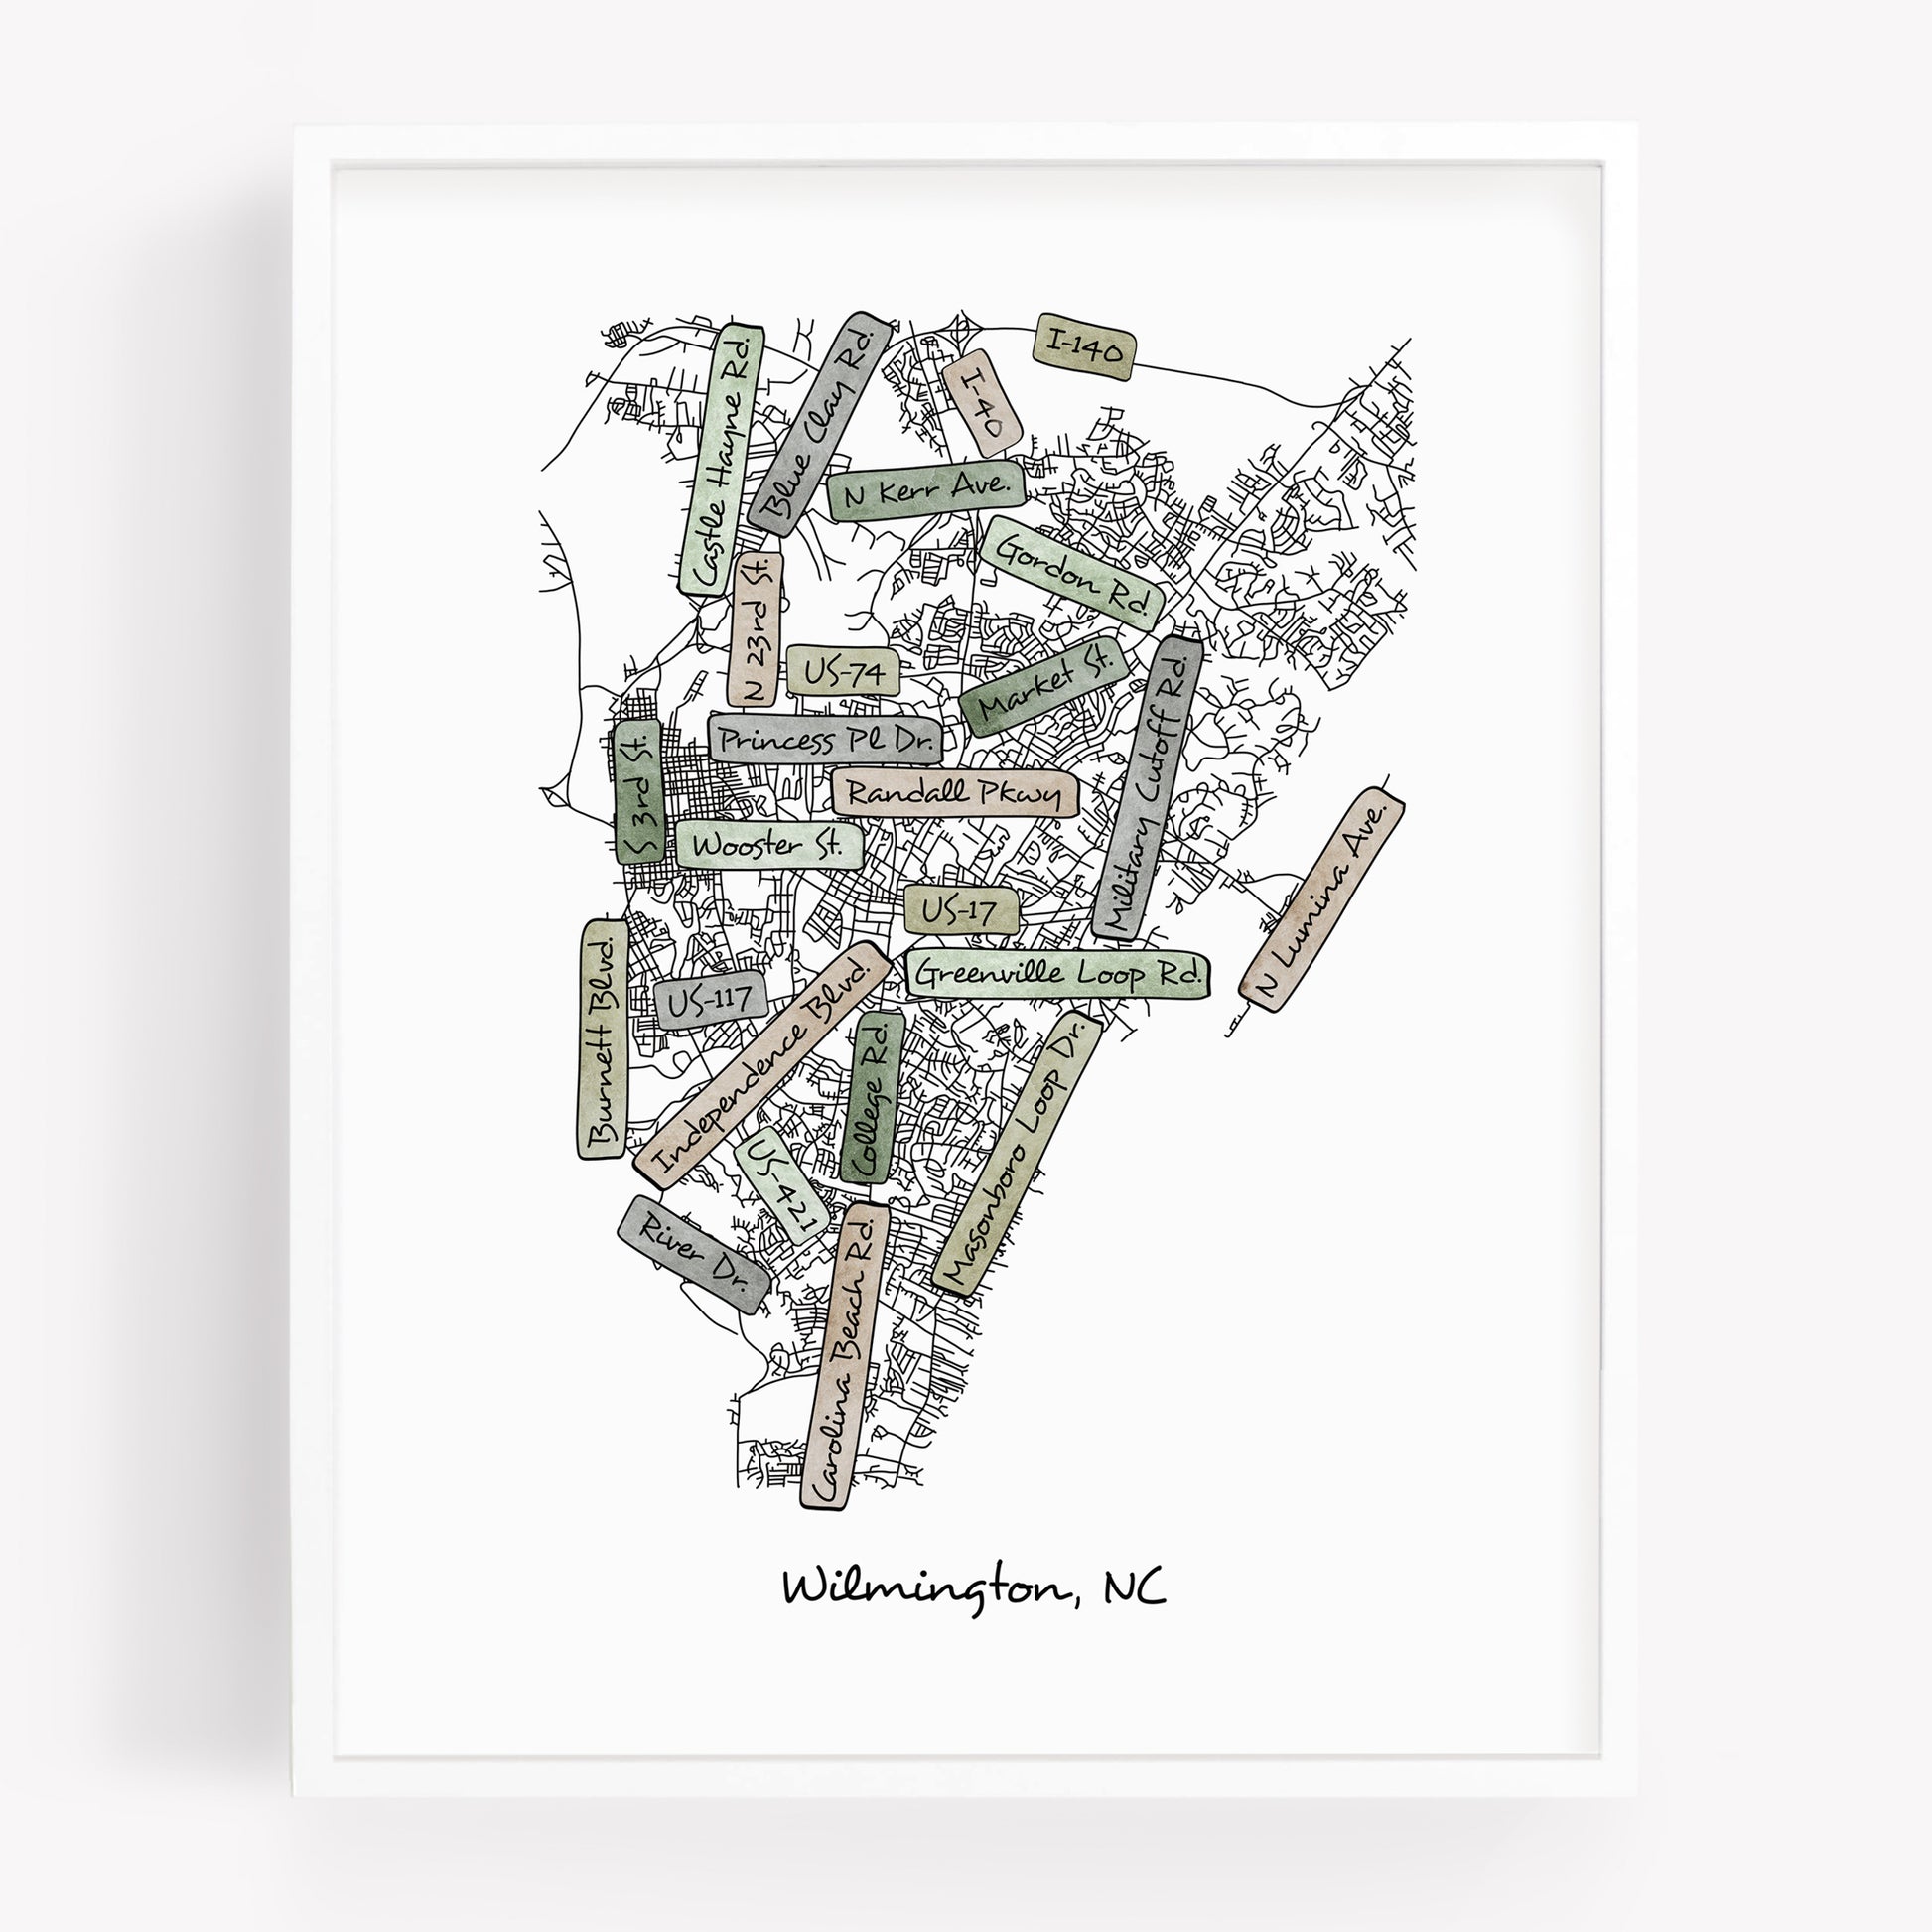 A hand-drawn street map art print of Wilmington North Carolina - in the color earthy